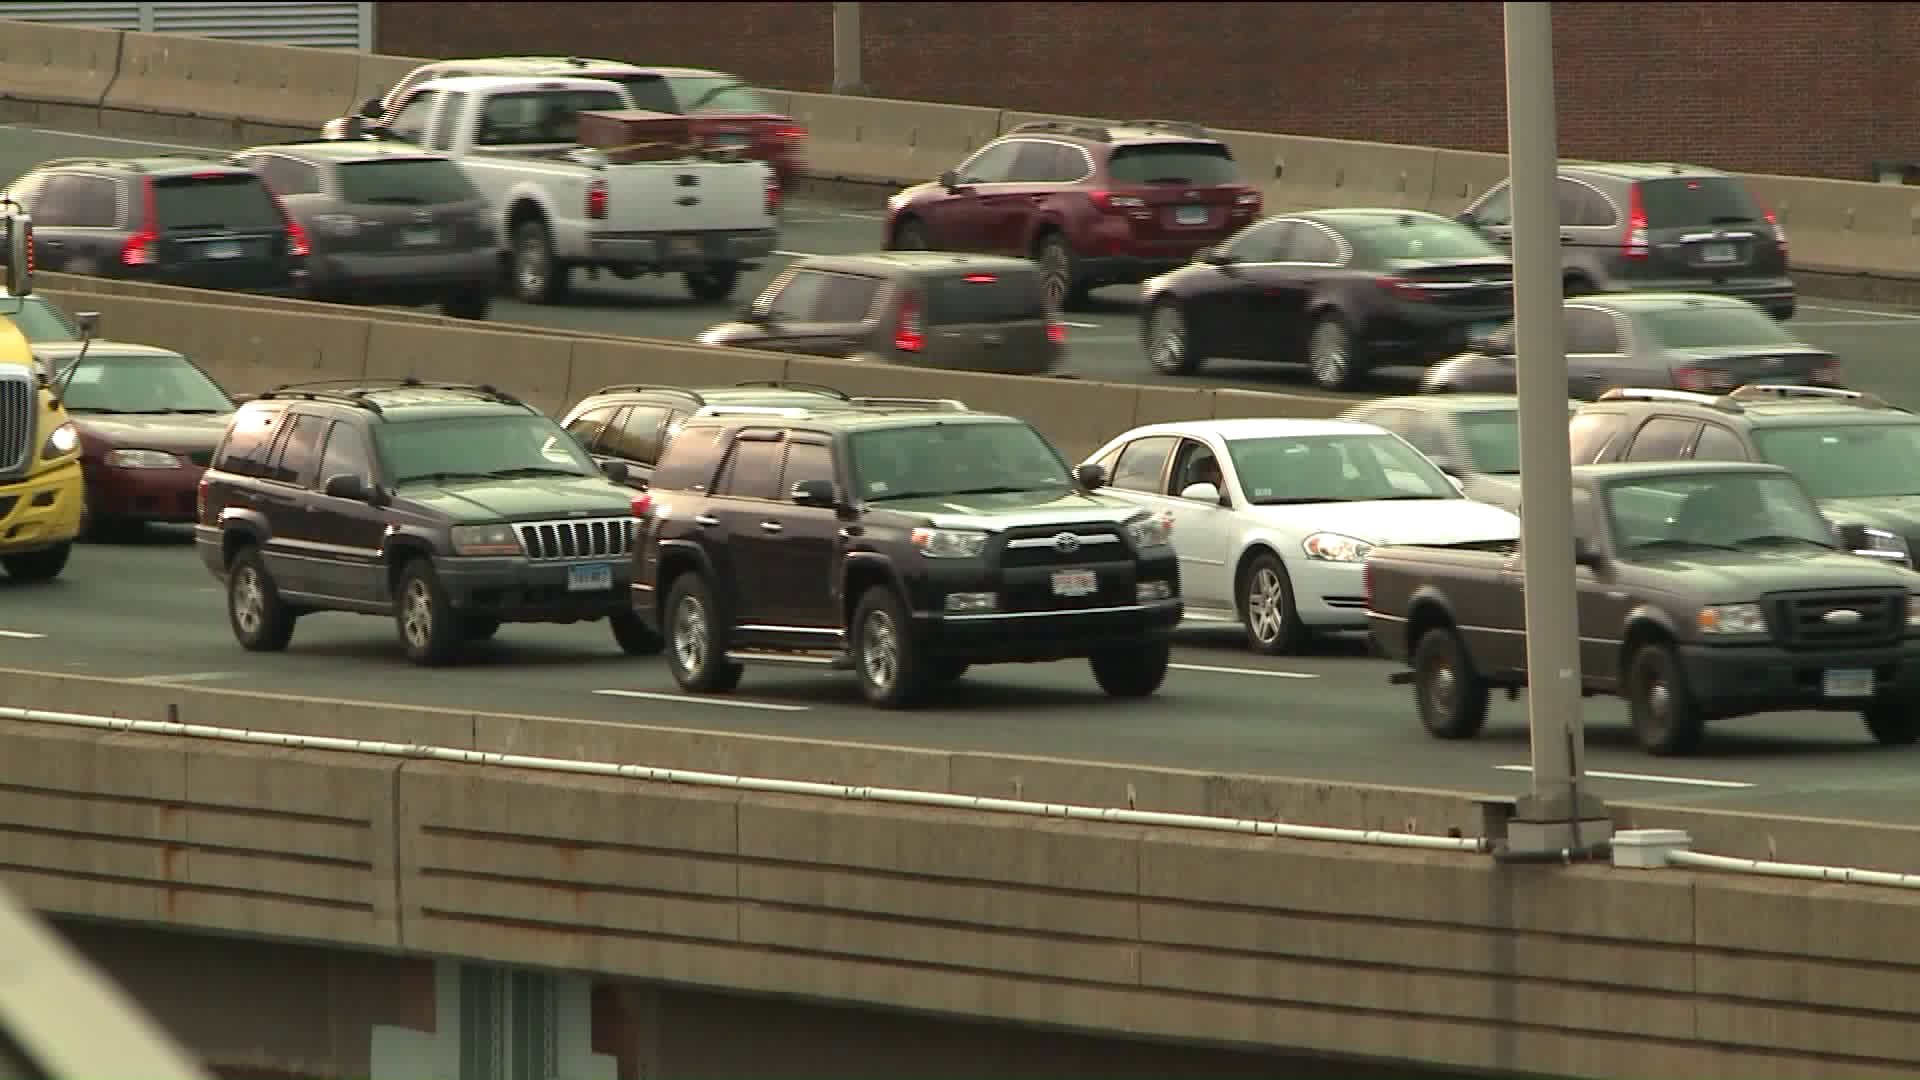 Tolls in Connecticut takes a step closer to a possibility